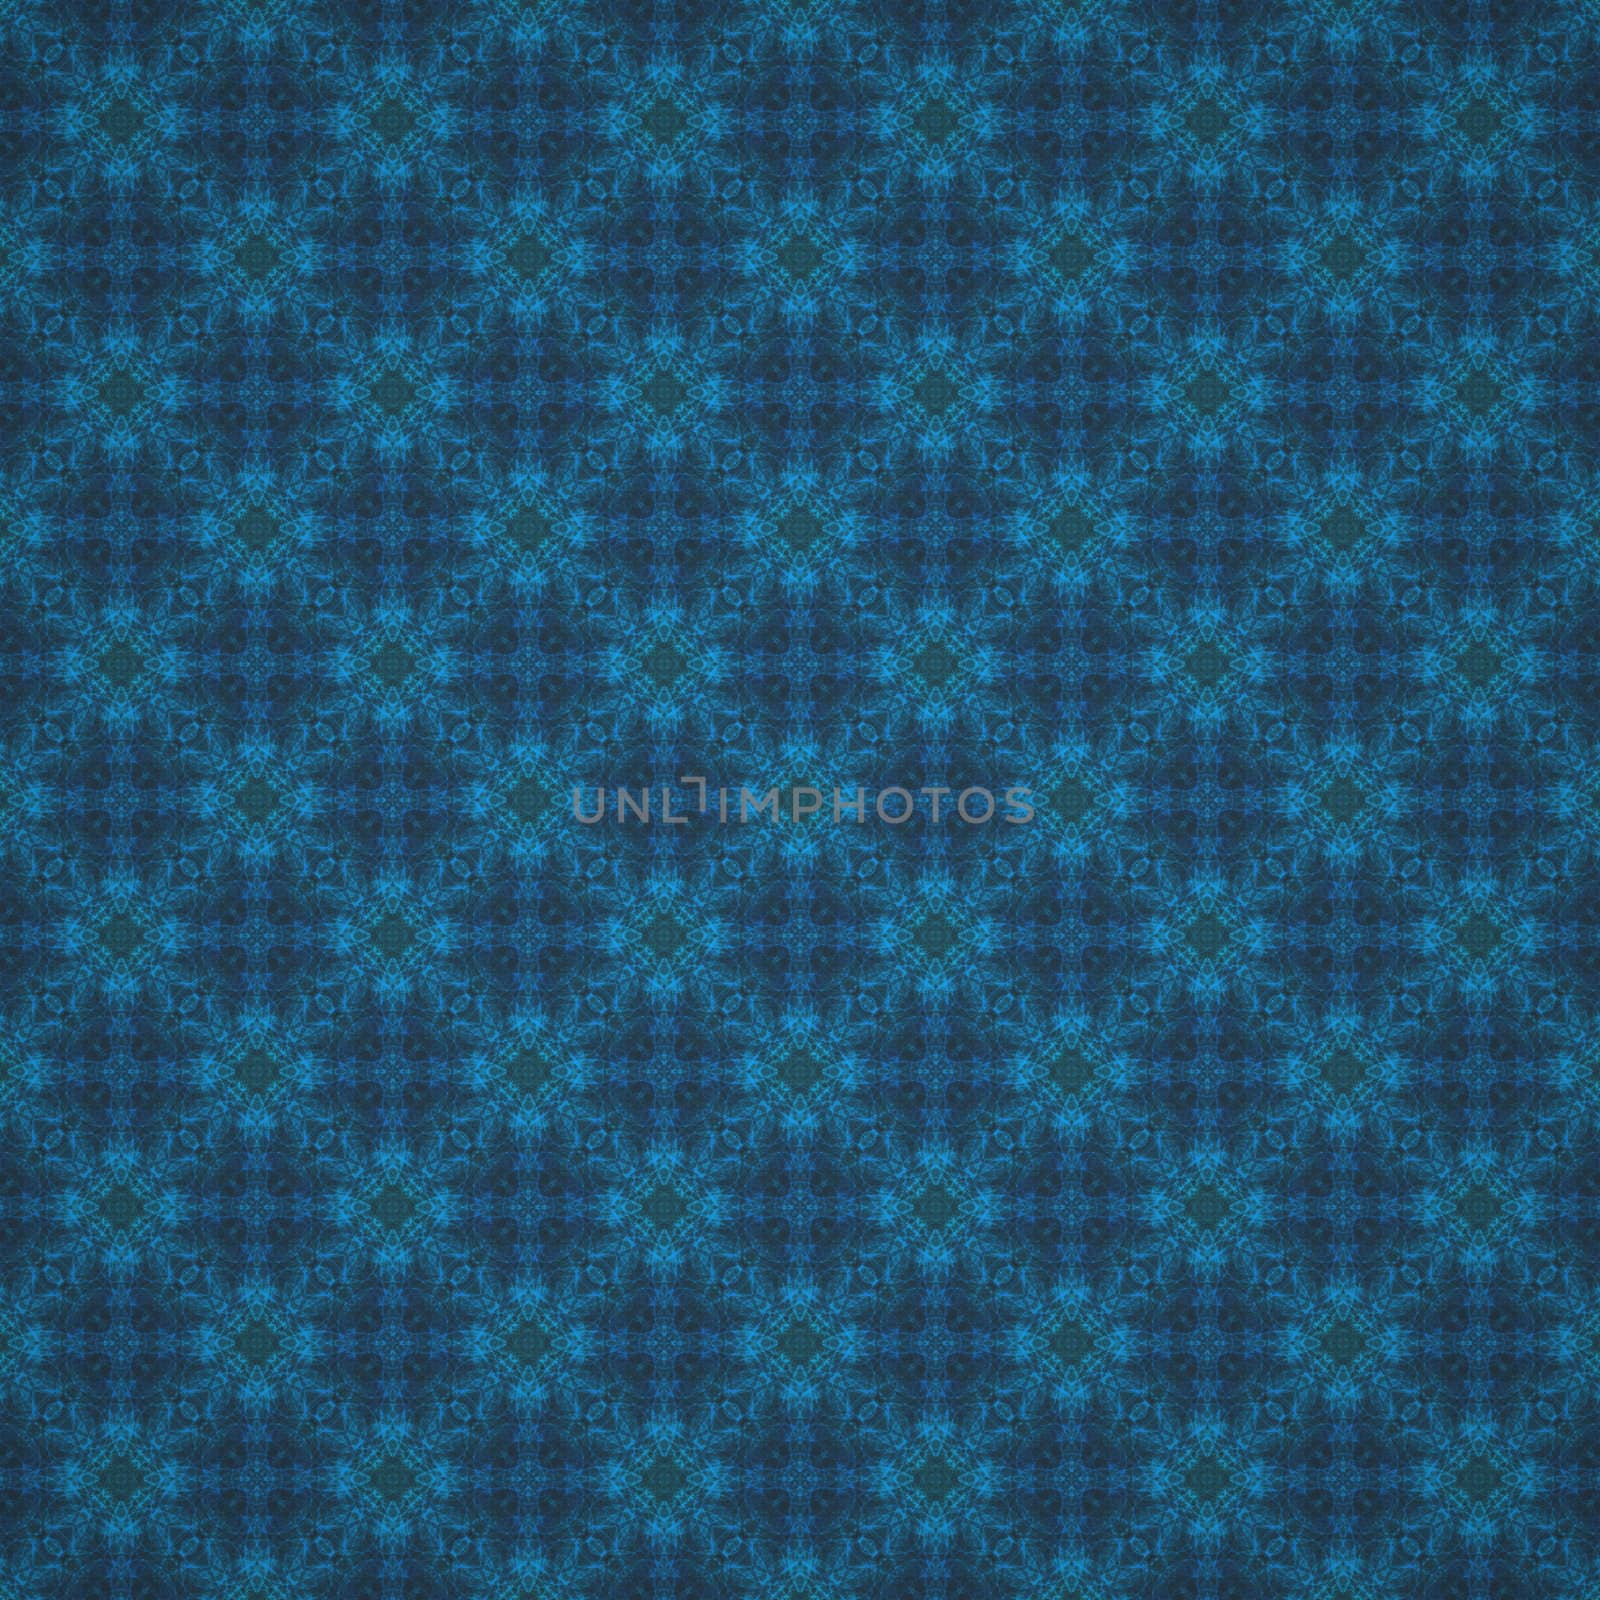 An image of a blue wallpaper background